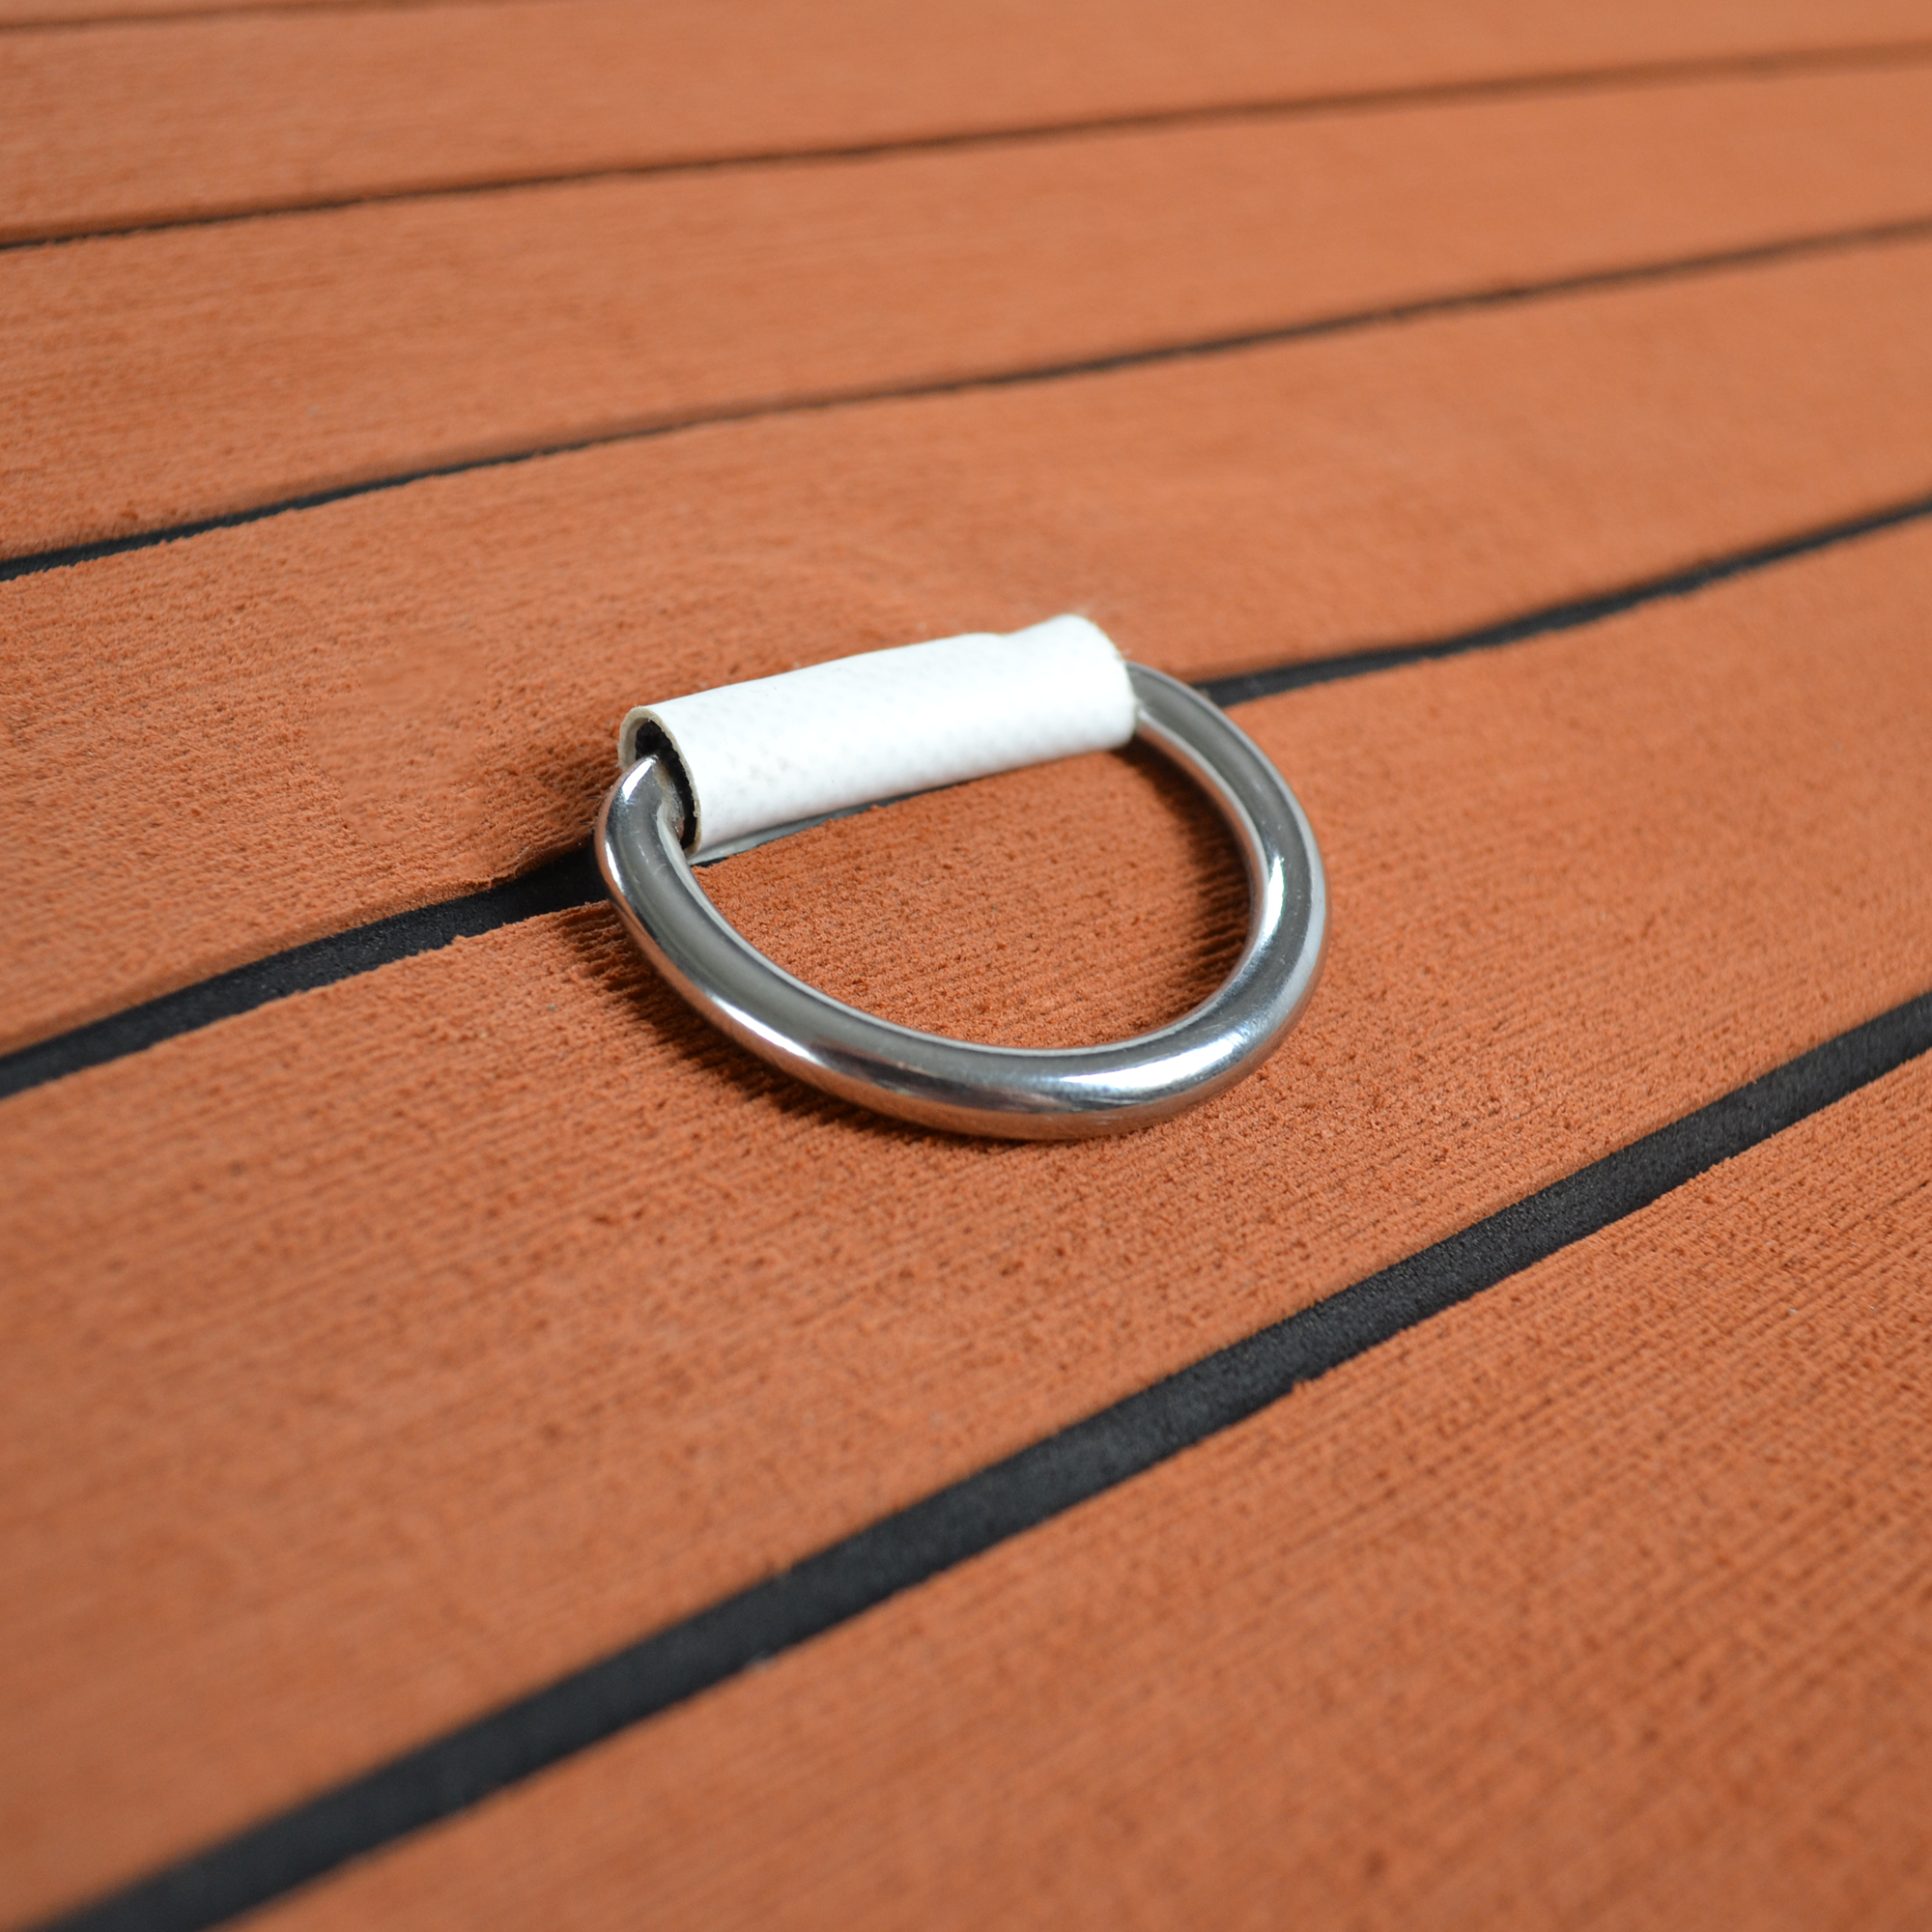 D ring tie down points so you can easily tie it down and use as a dog boat ladder